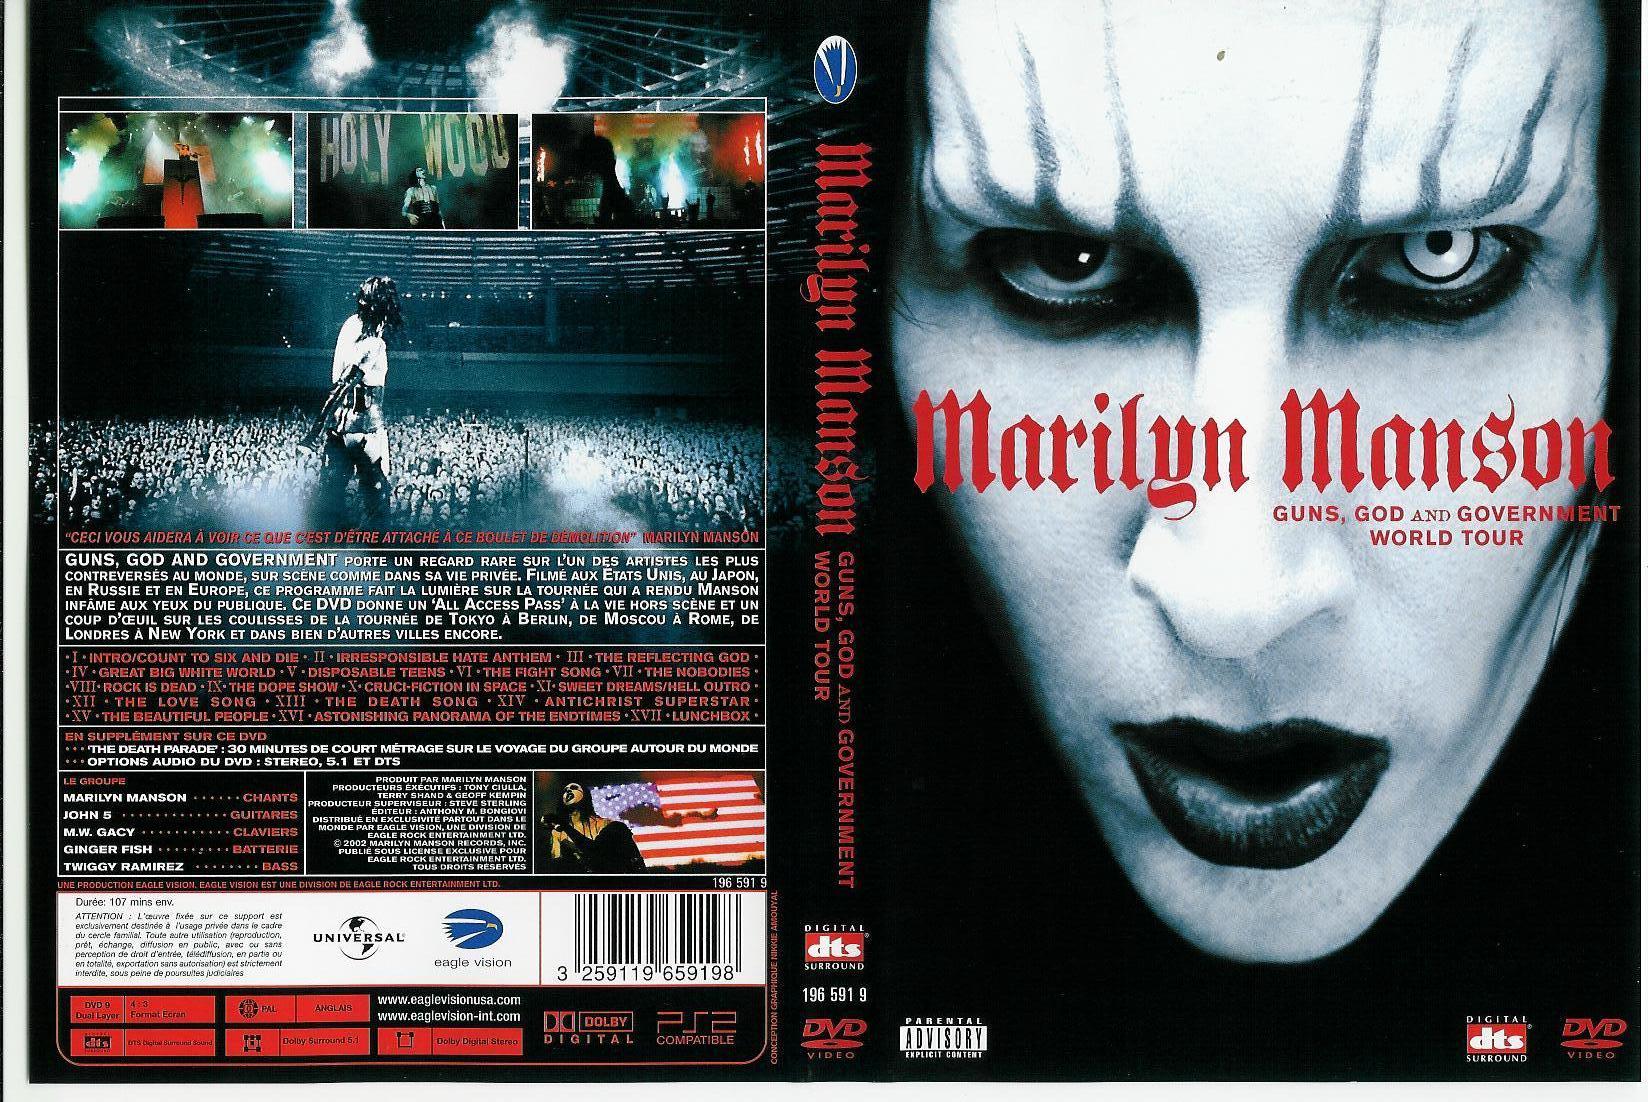 Jaquette DVD Marilyn manson - guns, god and government world tour